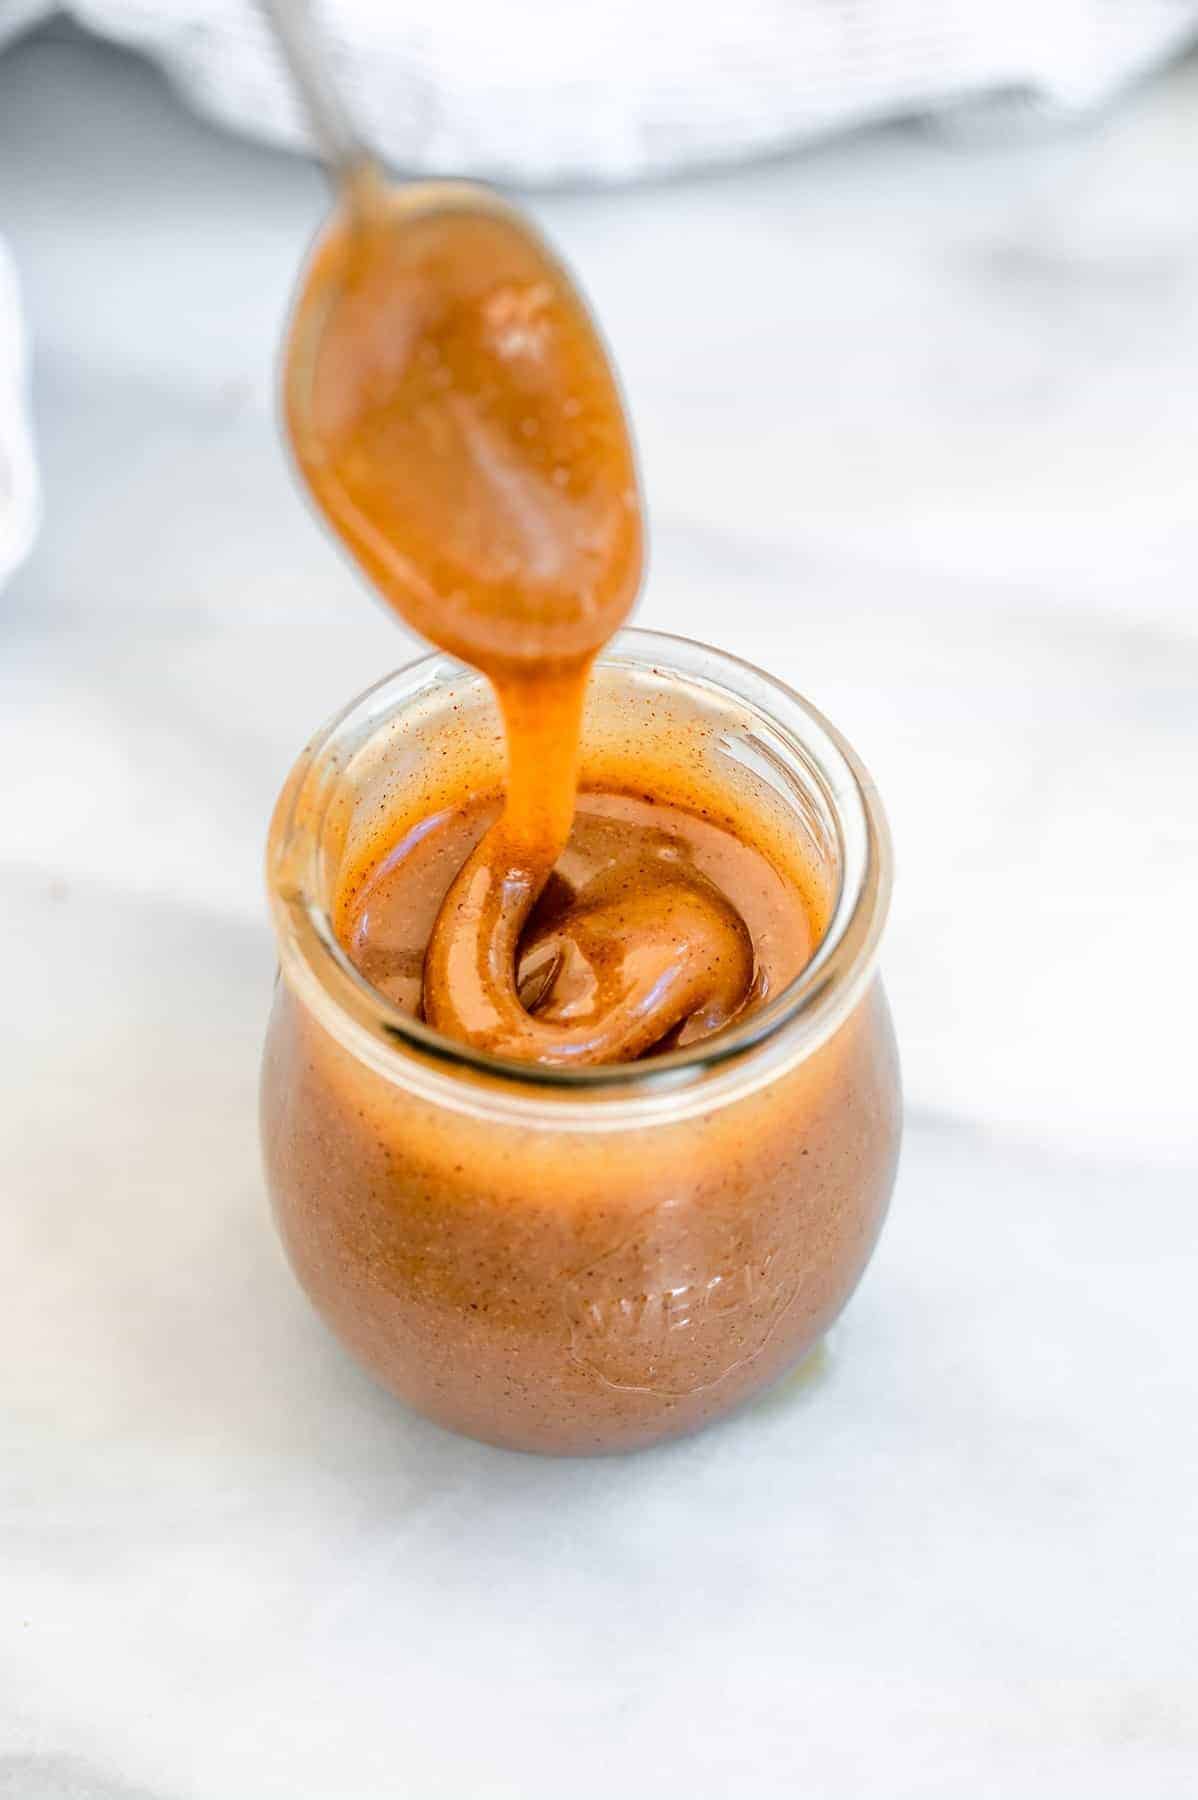 Spoon scooping out the vegan caramel from a glass jar.